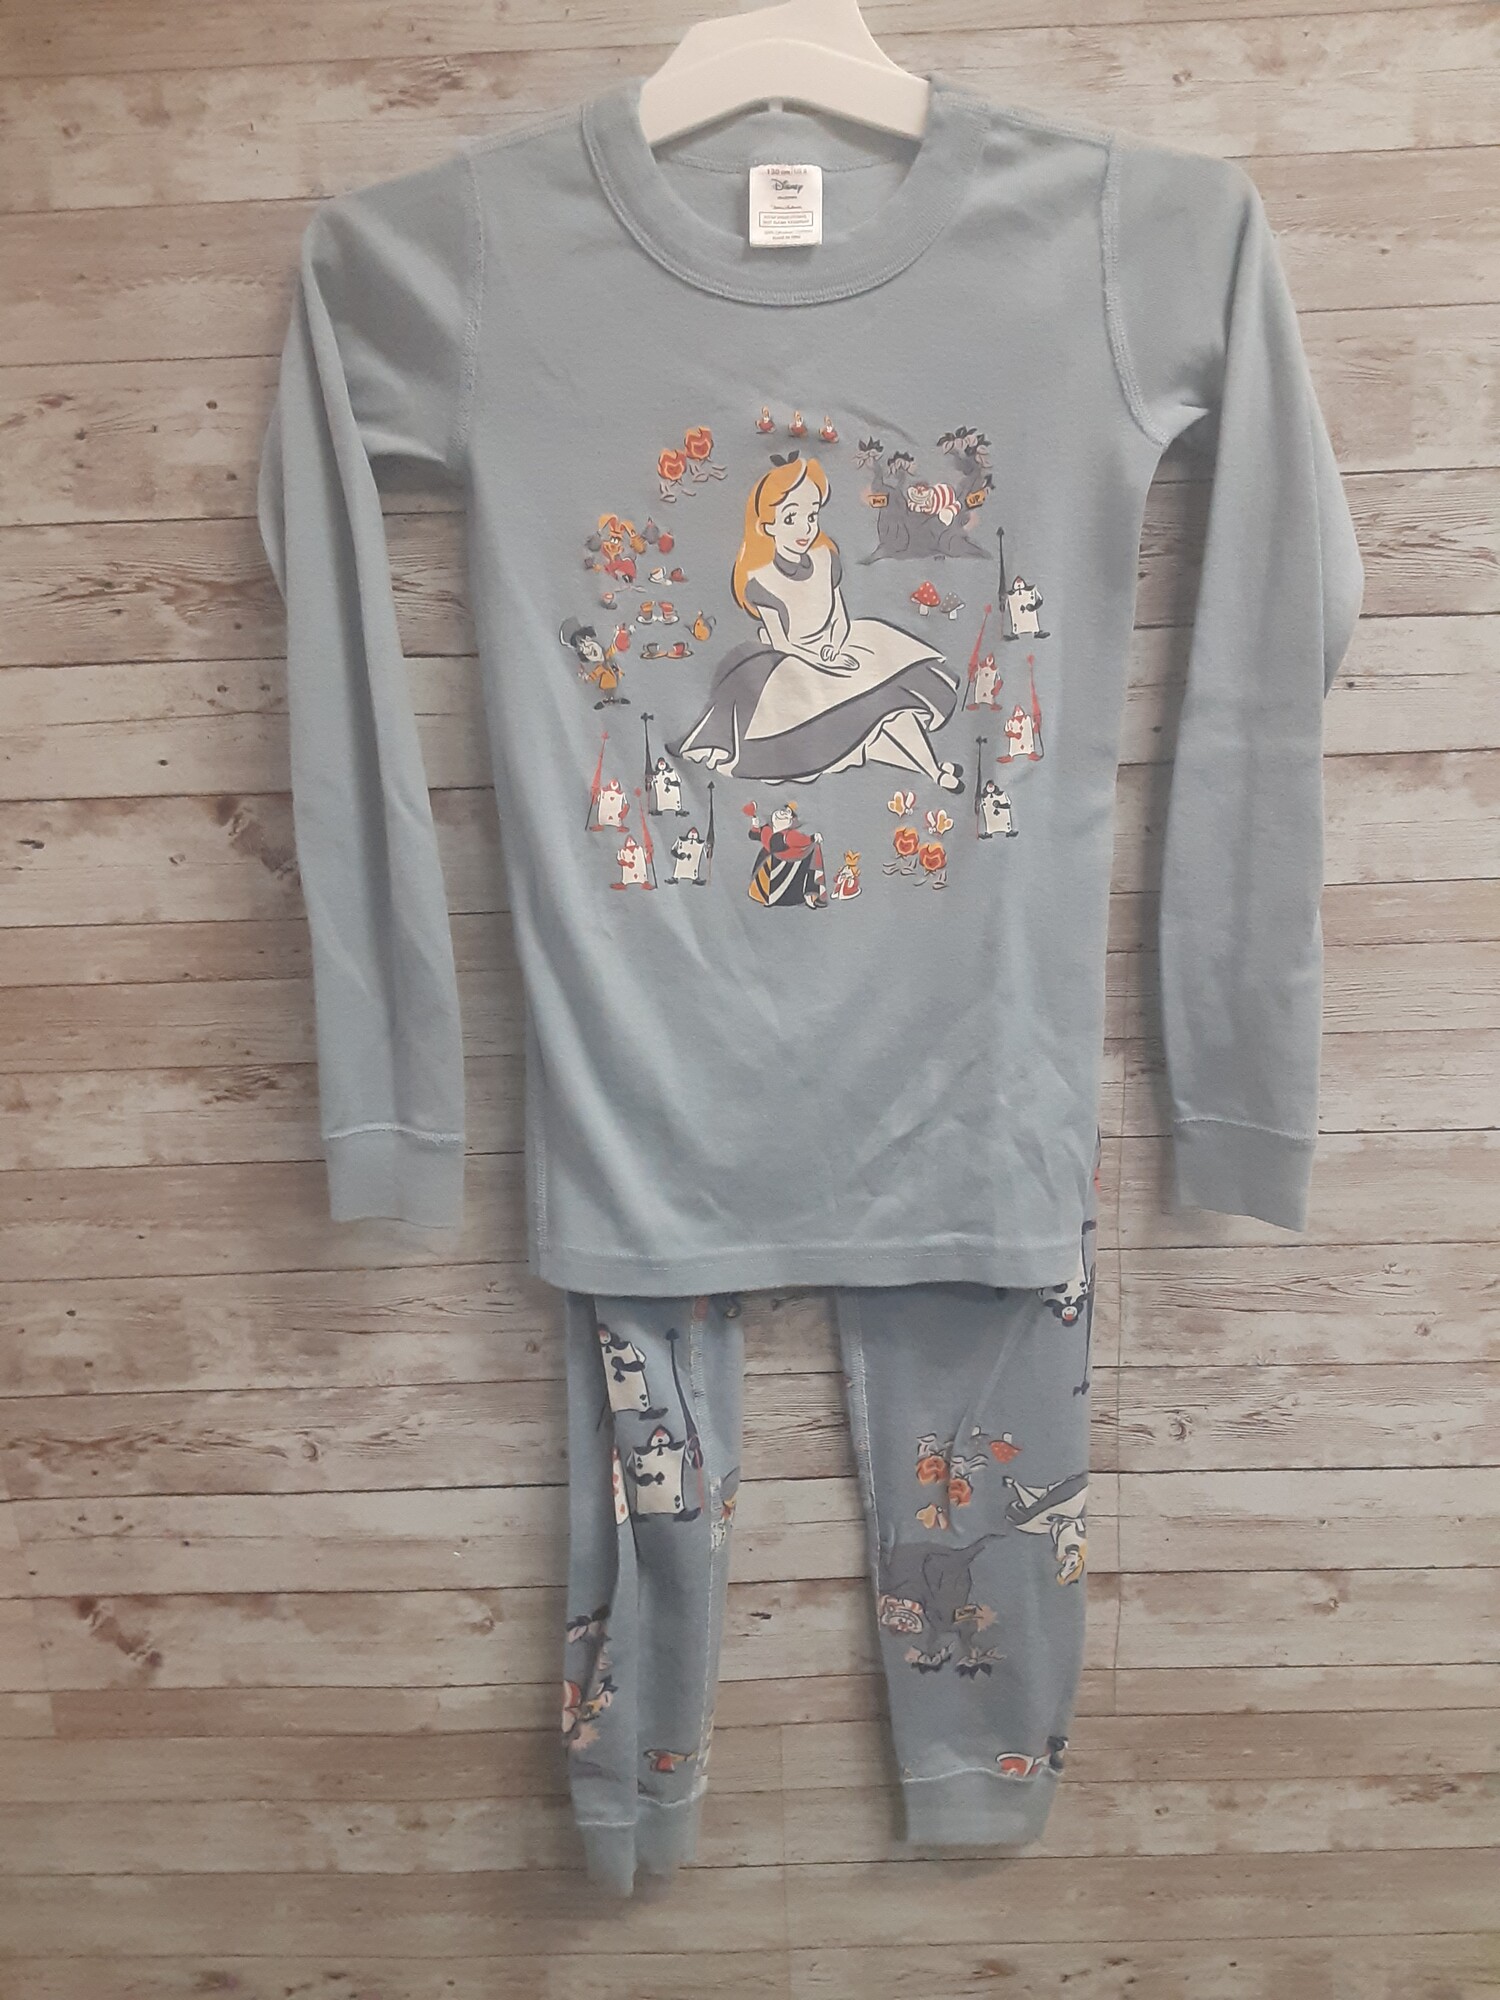 Hanna Andersson Pjs, Size: 8 Girls